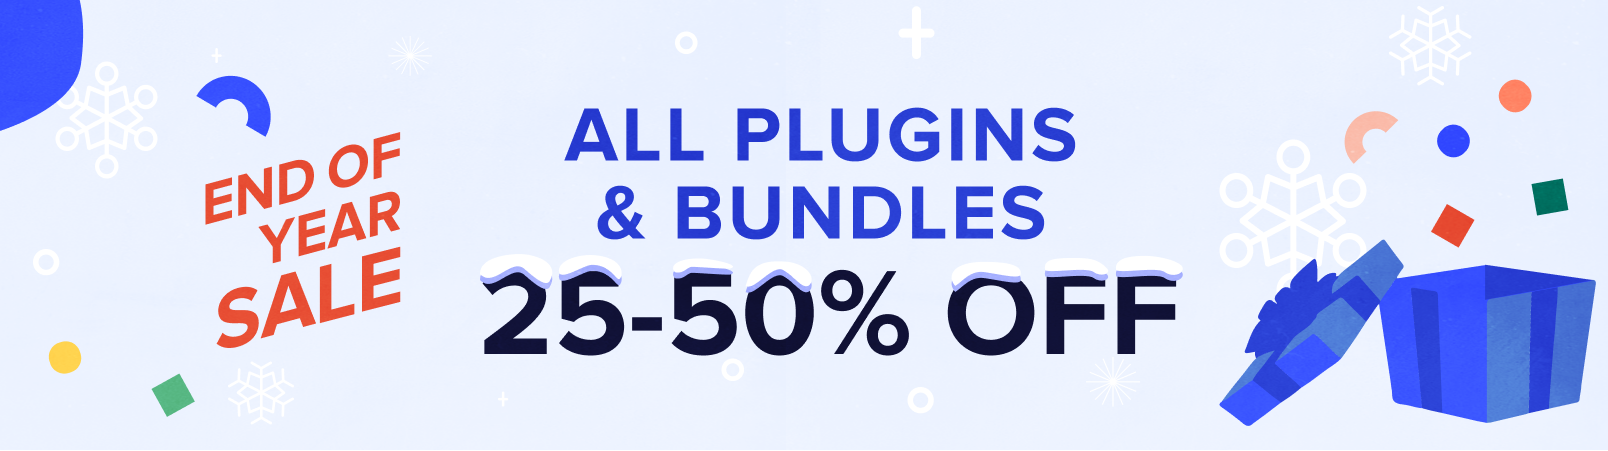 End of year sale. All plugins and bundles 25% to 50% off